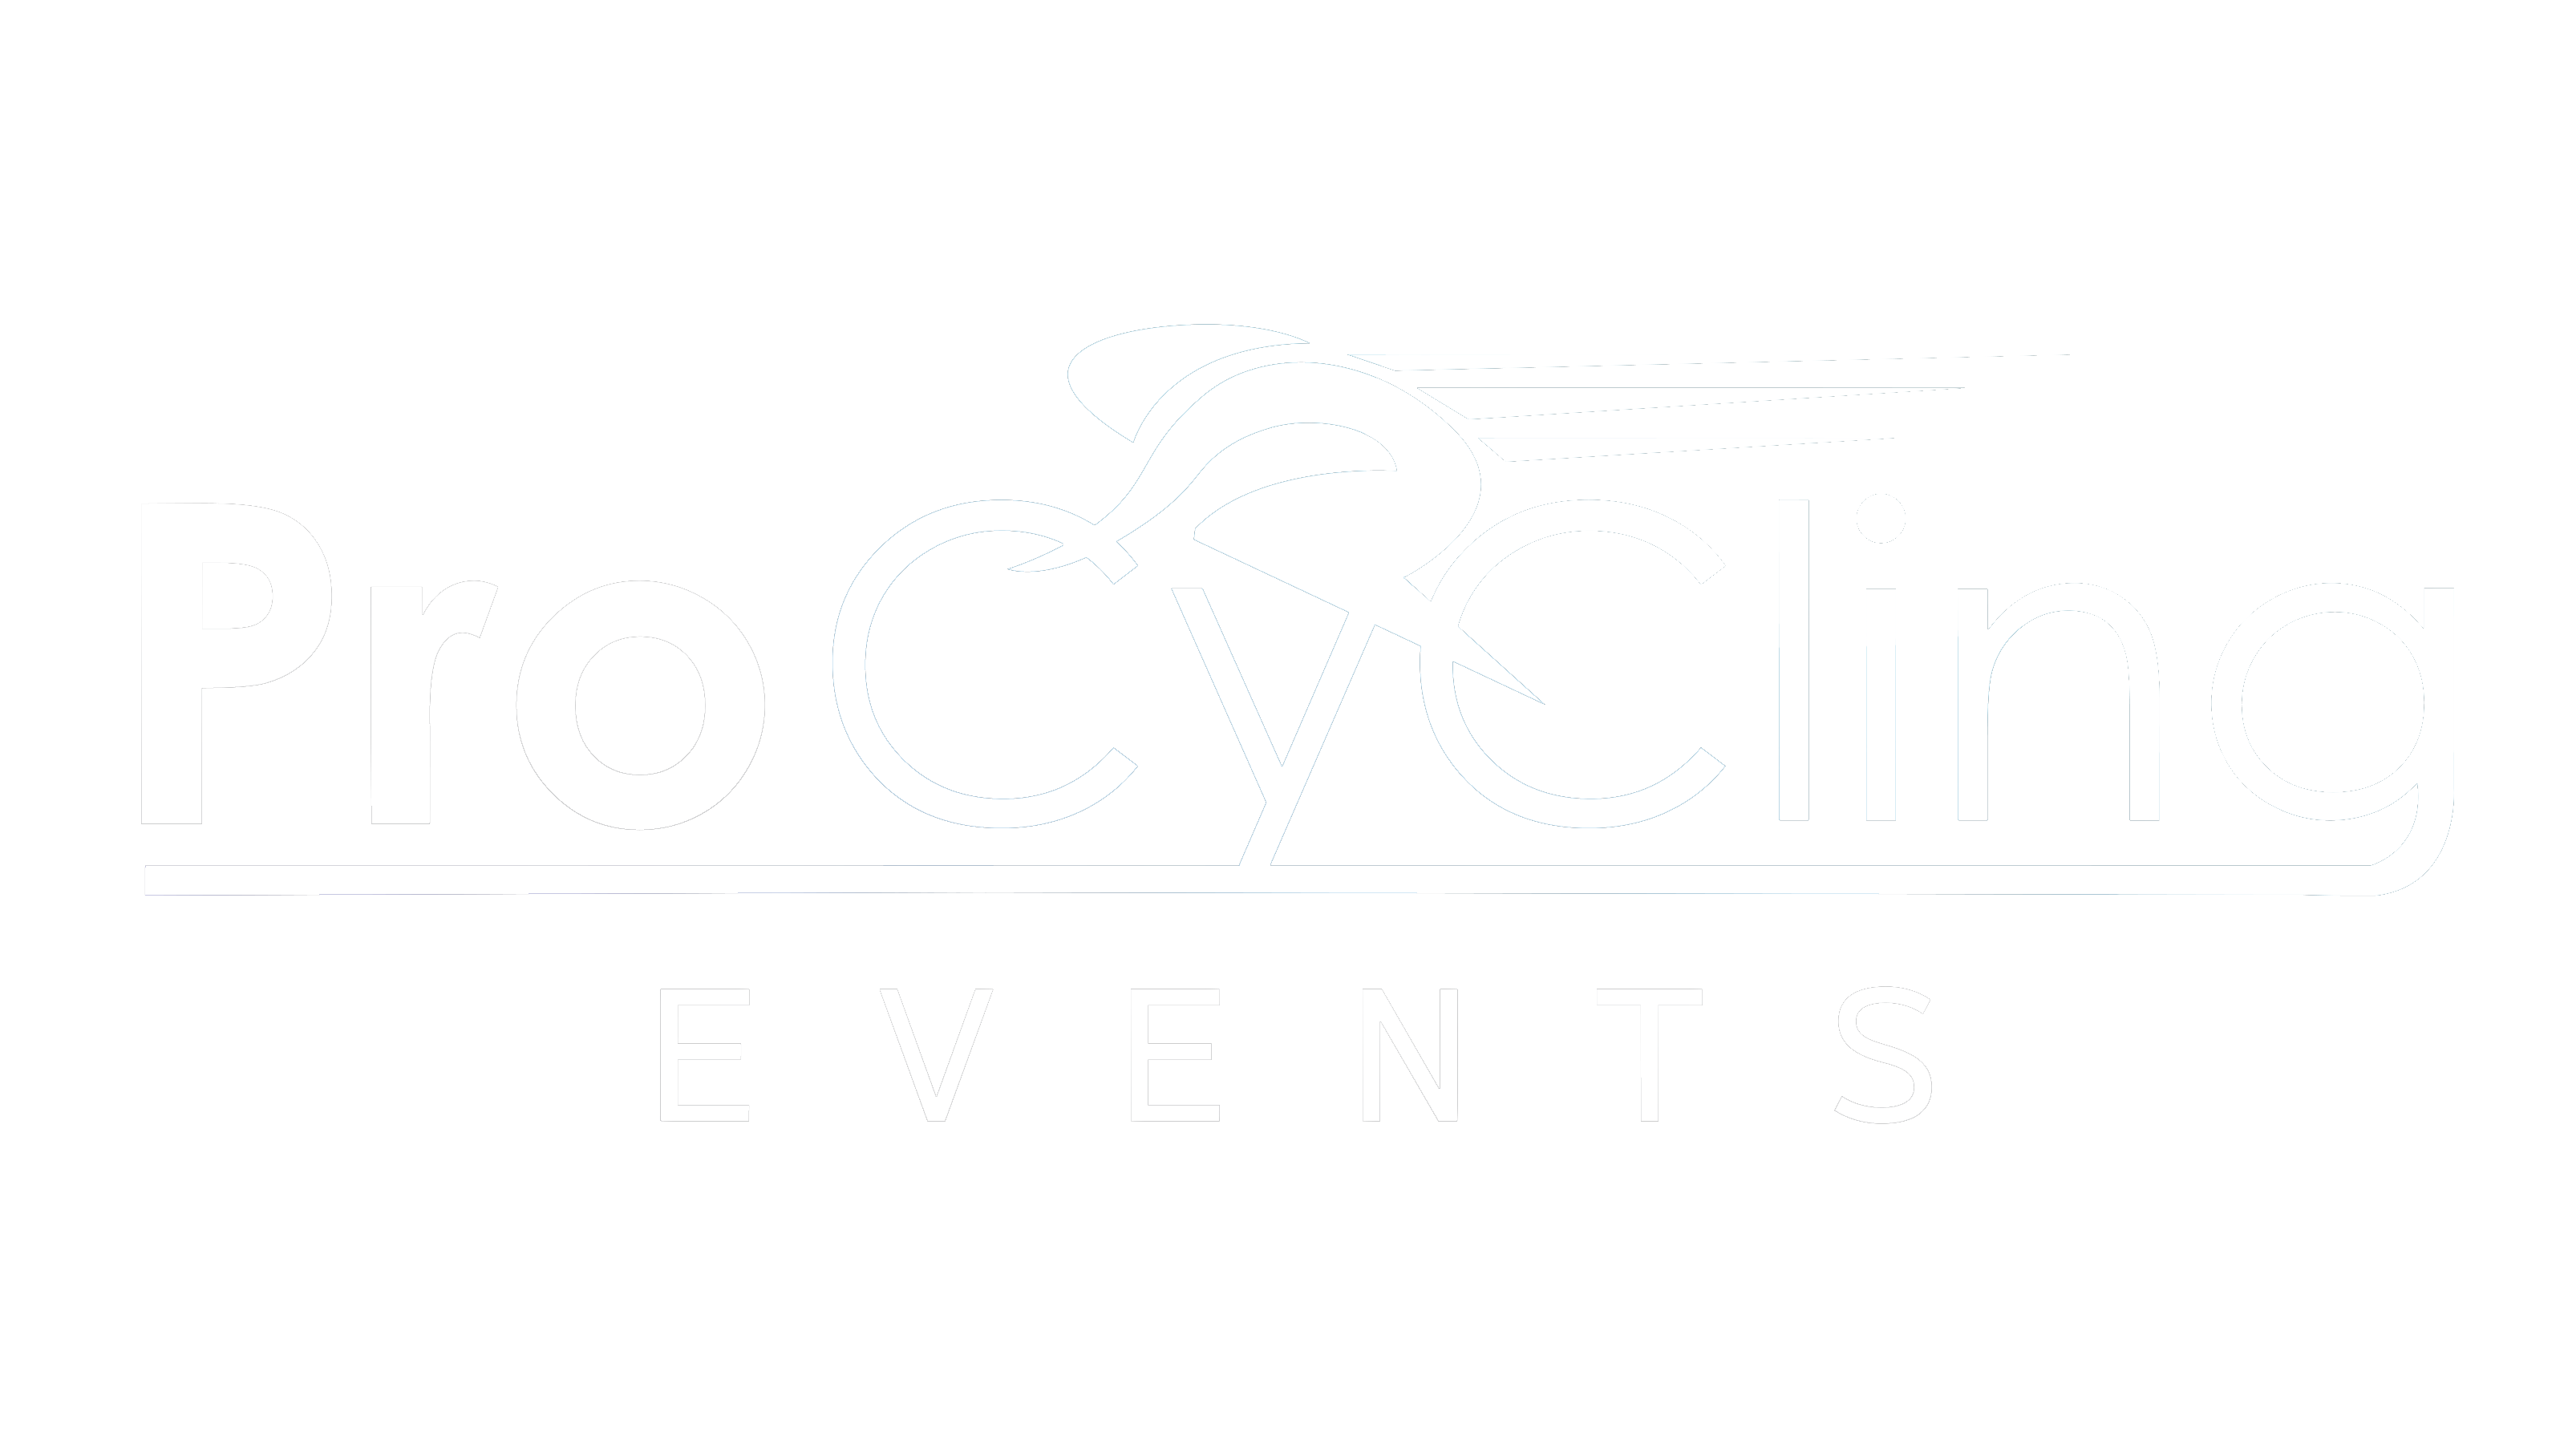 Pro Cycling Events